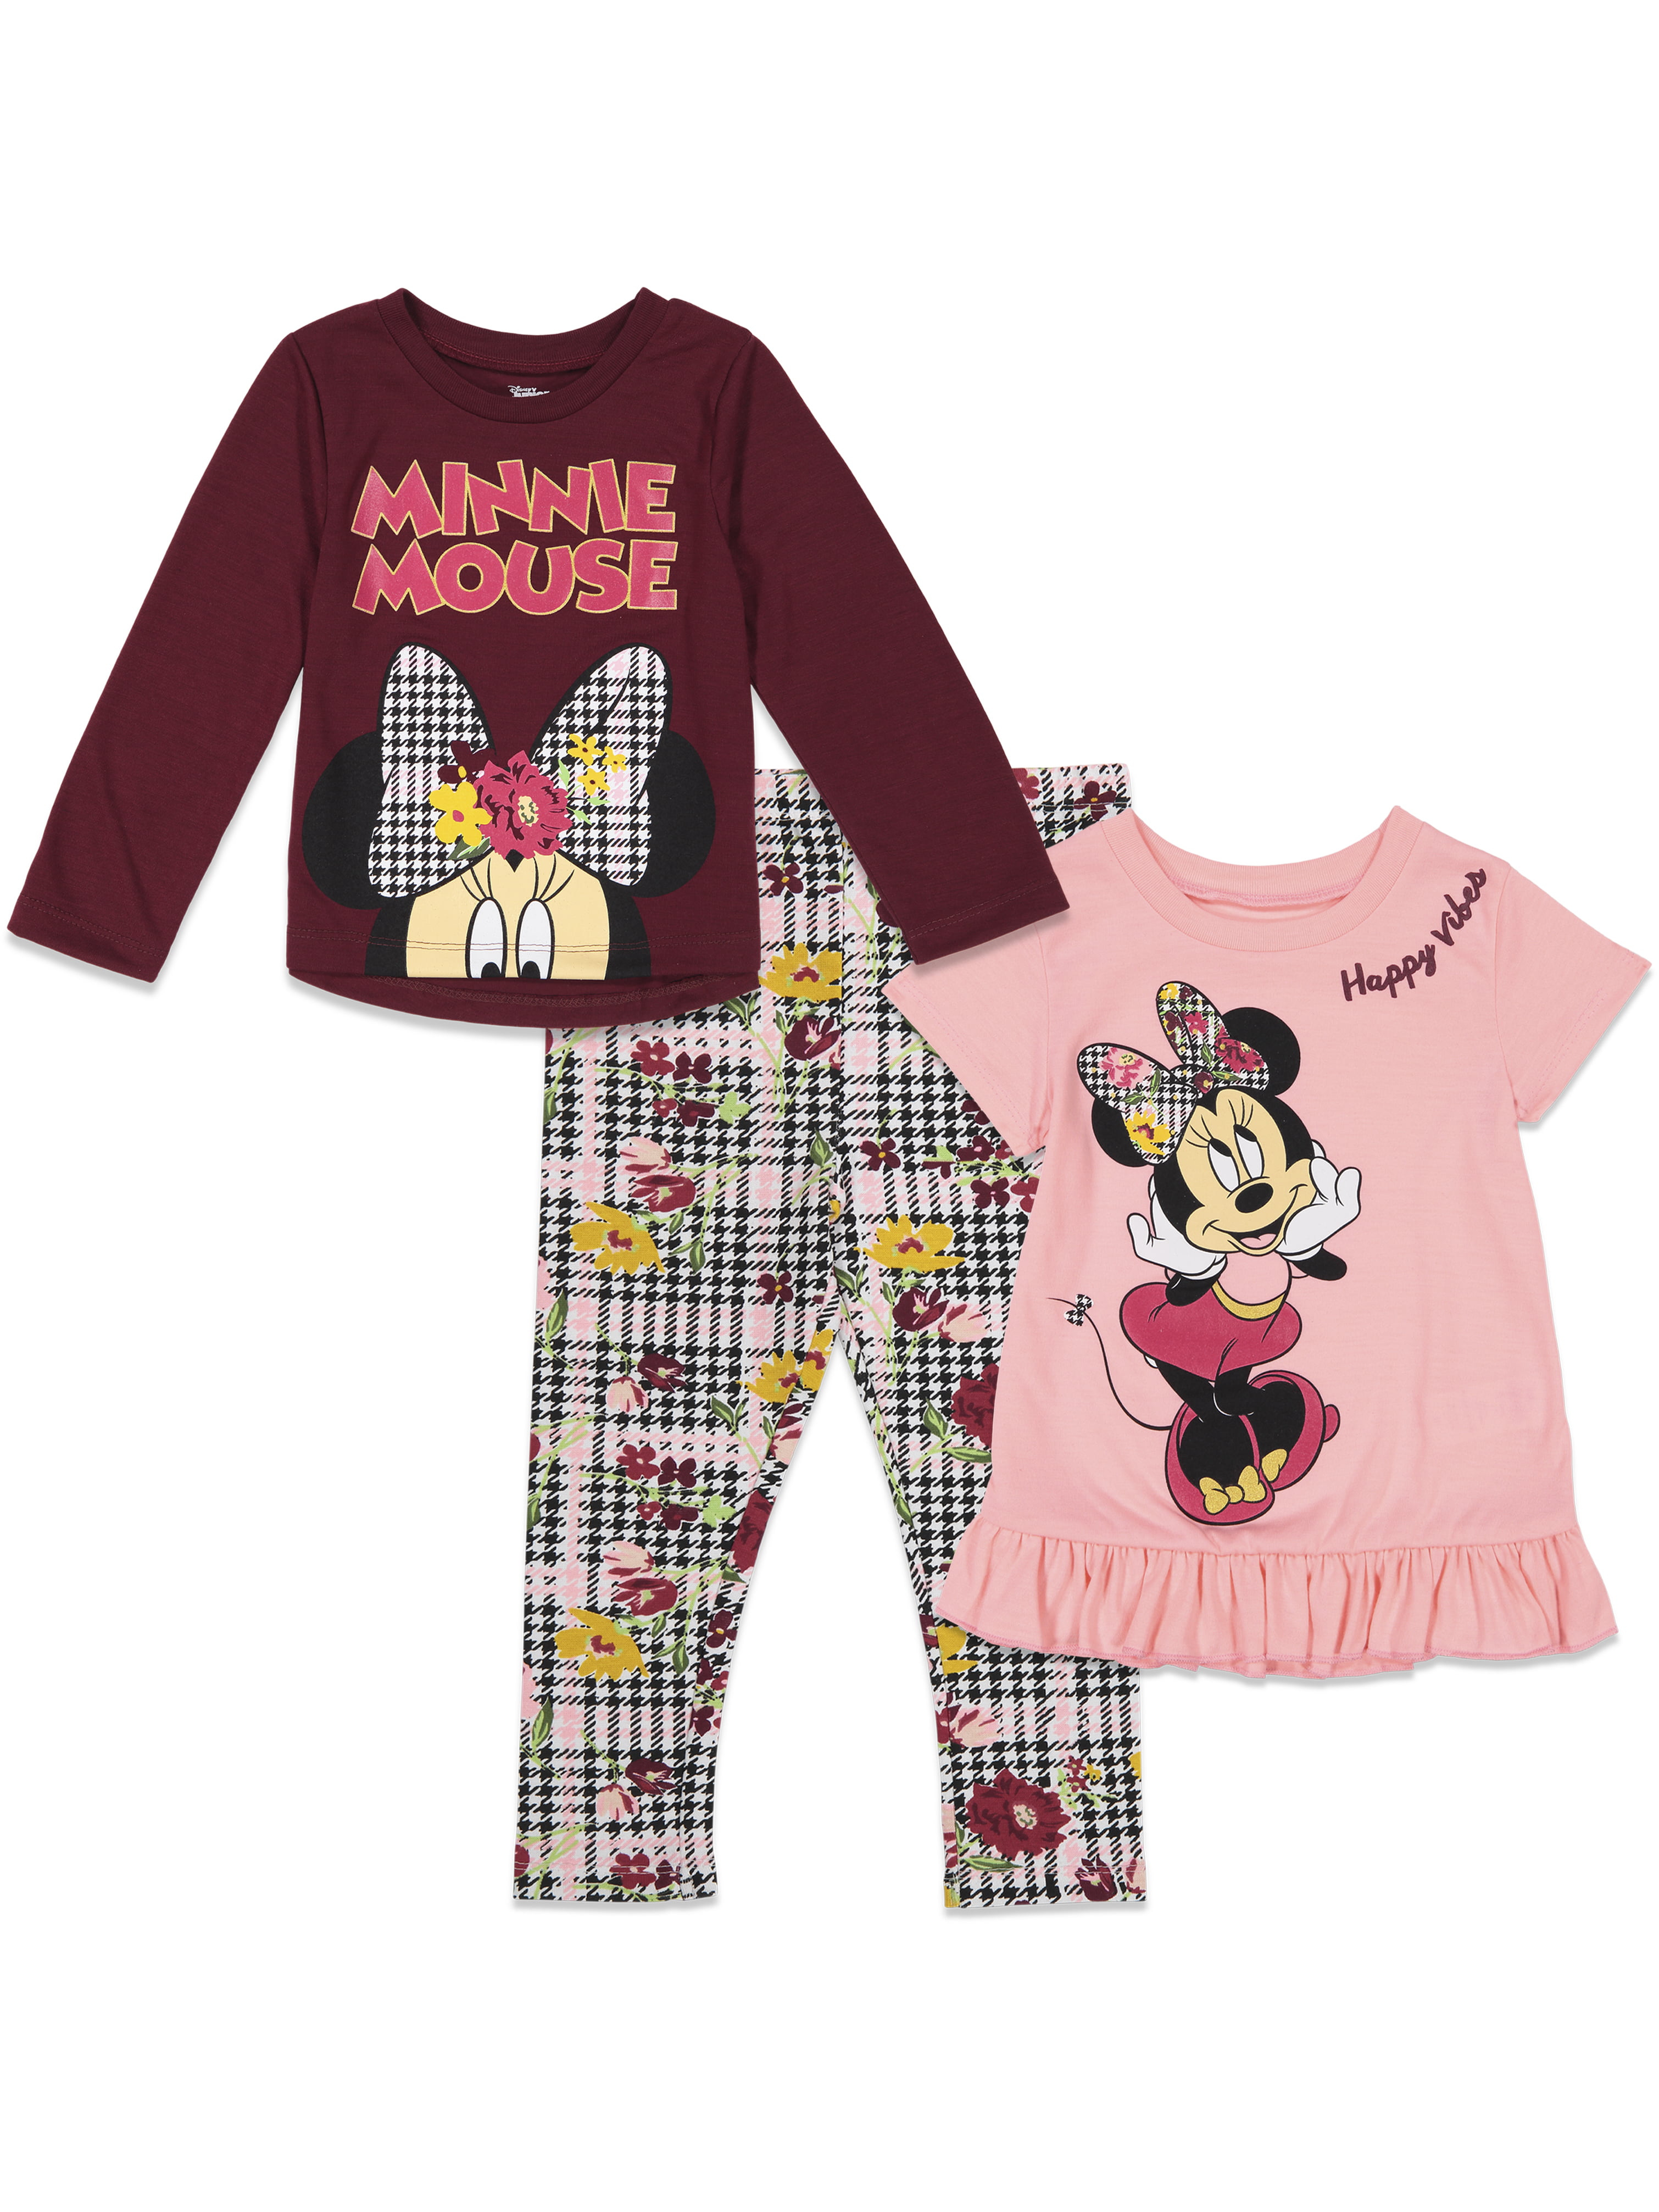 Disney boys girls joggers sweat top and socks Tigger or Minnie Mouse set 